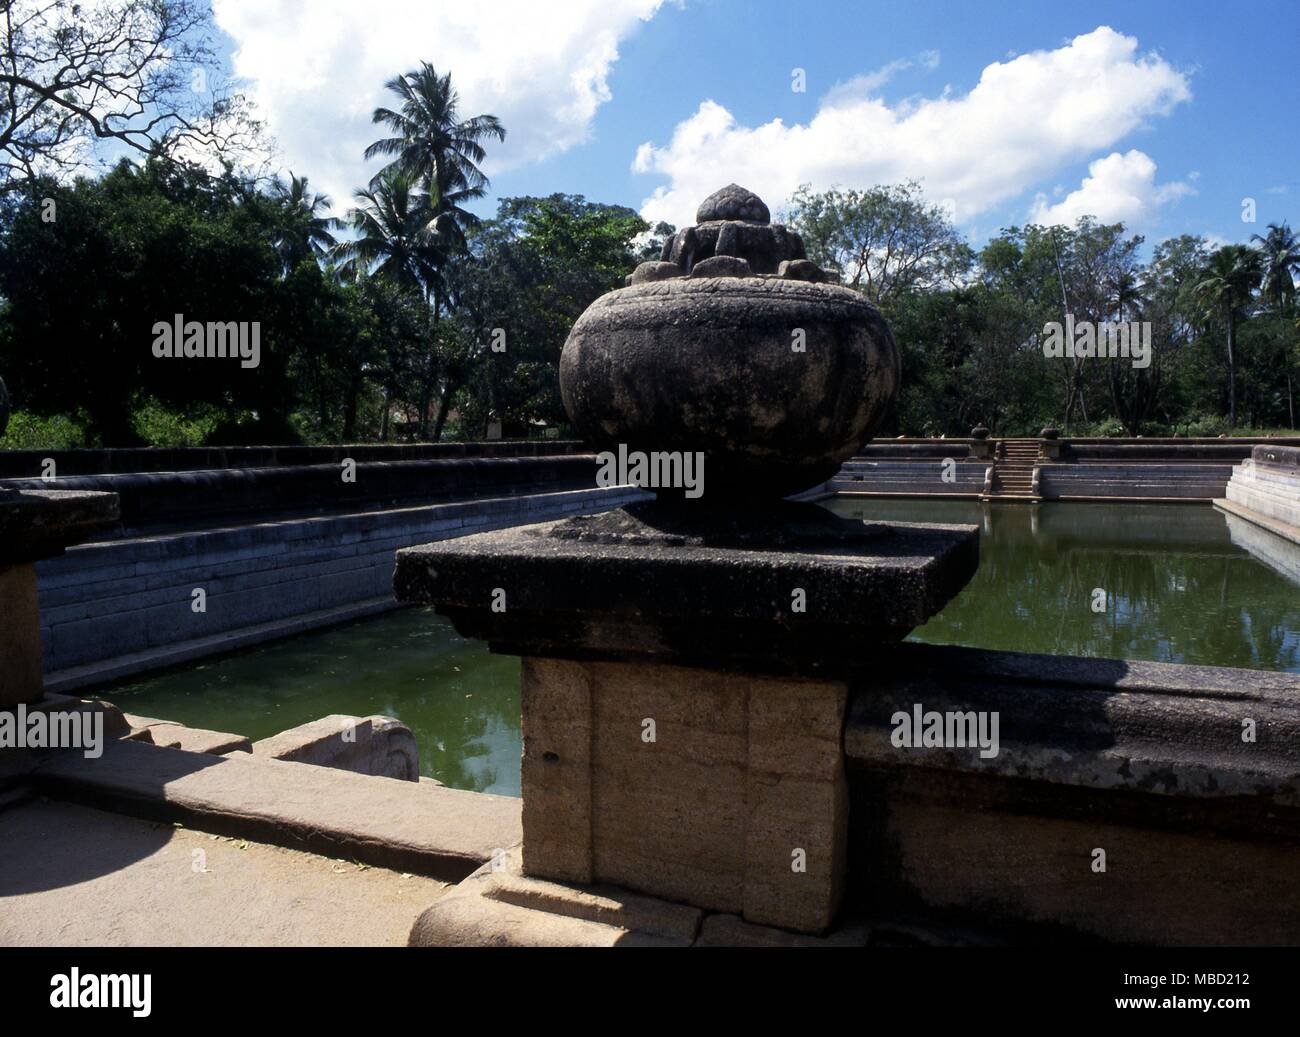 Holy Wells. The sacred wells or baths at Anadurapada, Sri Lanka. These are the best preserved at this ancient site. Stock Photo